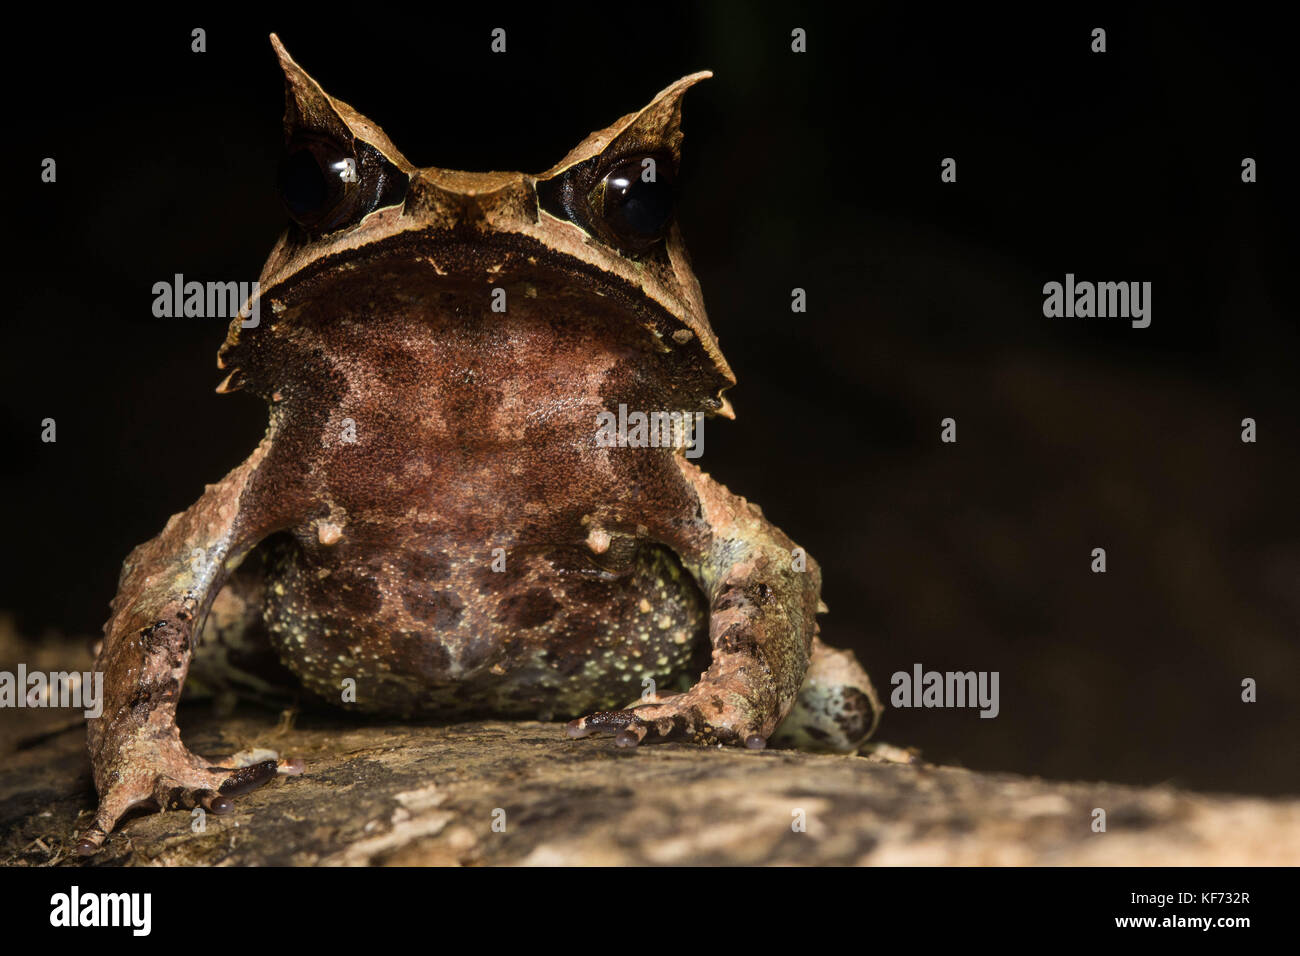 A portrait of a long-nosed horned frog (Megophrys nasuta) from the Bornean jungle. Stock Photo